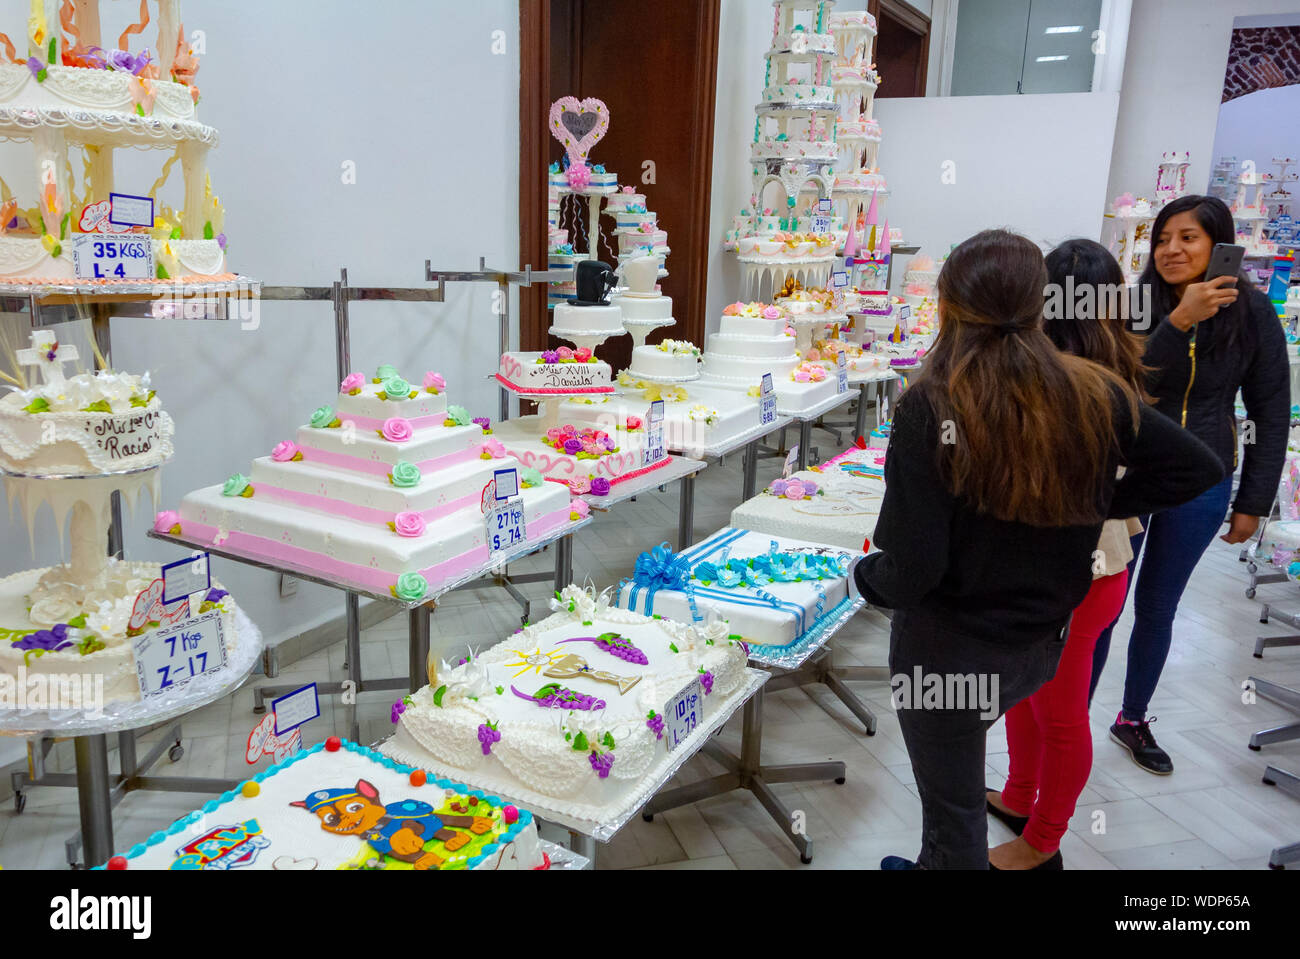 Local females looking at fancy cakes at PAS ELERIA IDEAL, a local bakery, mexico city, mexico Stock Photo